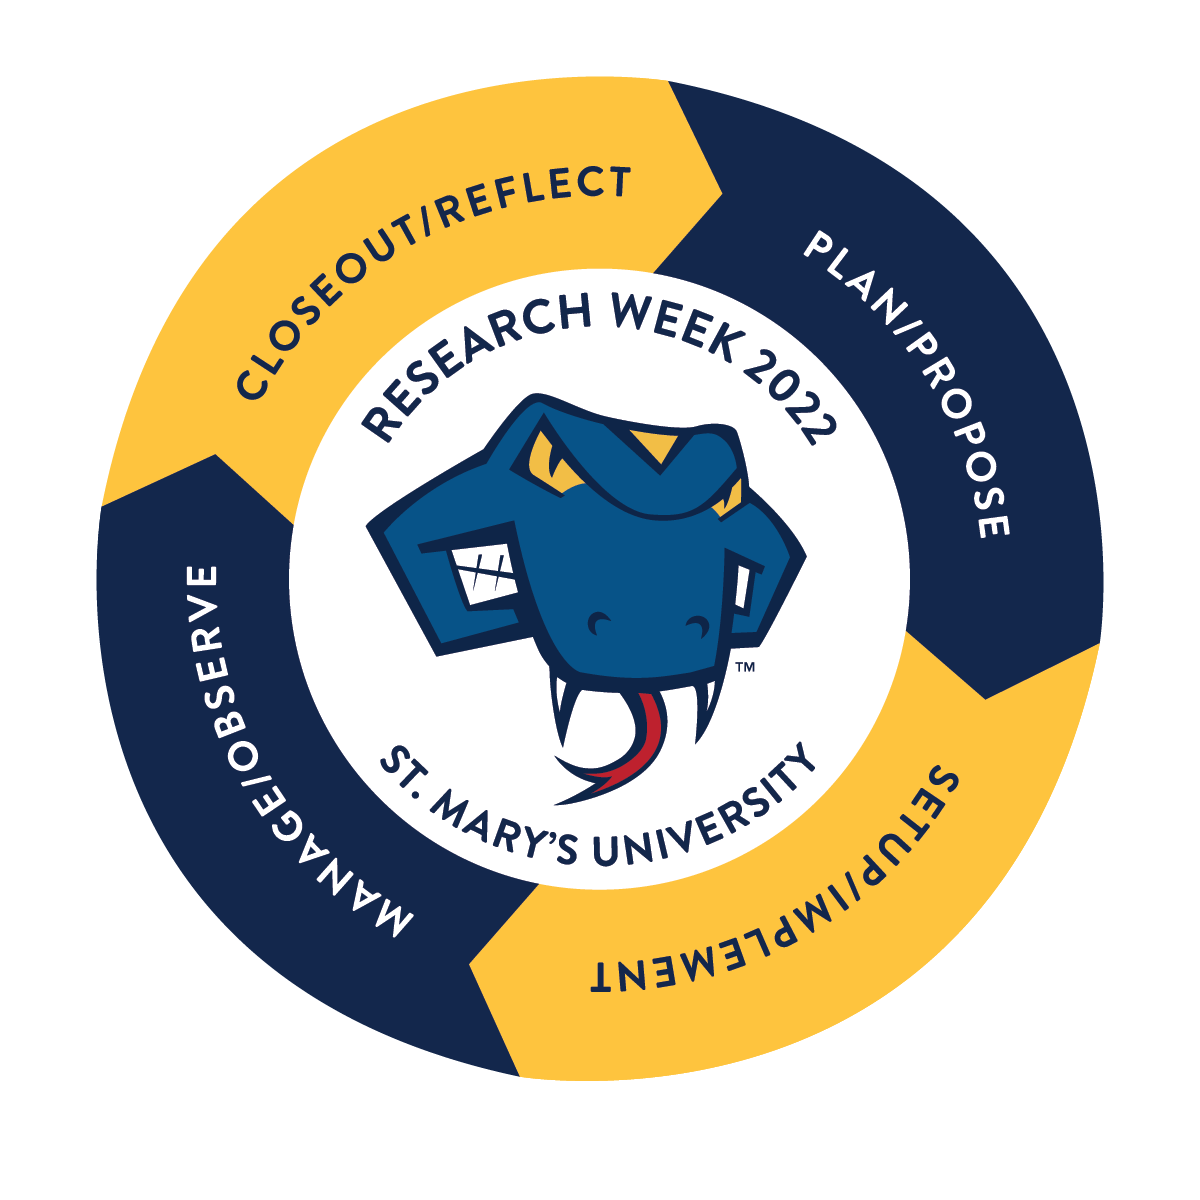 Research Week logo describing the Research process, including plan/propose, setup/implement, manage/observe, and closeout/reflect